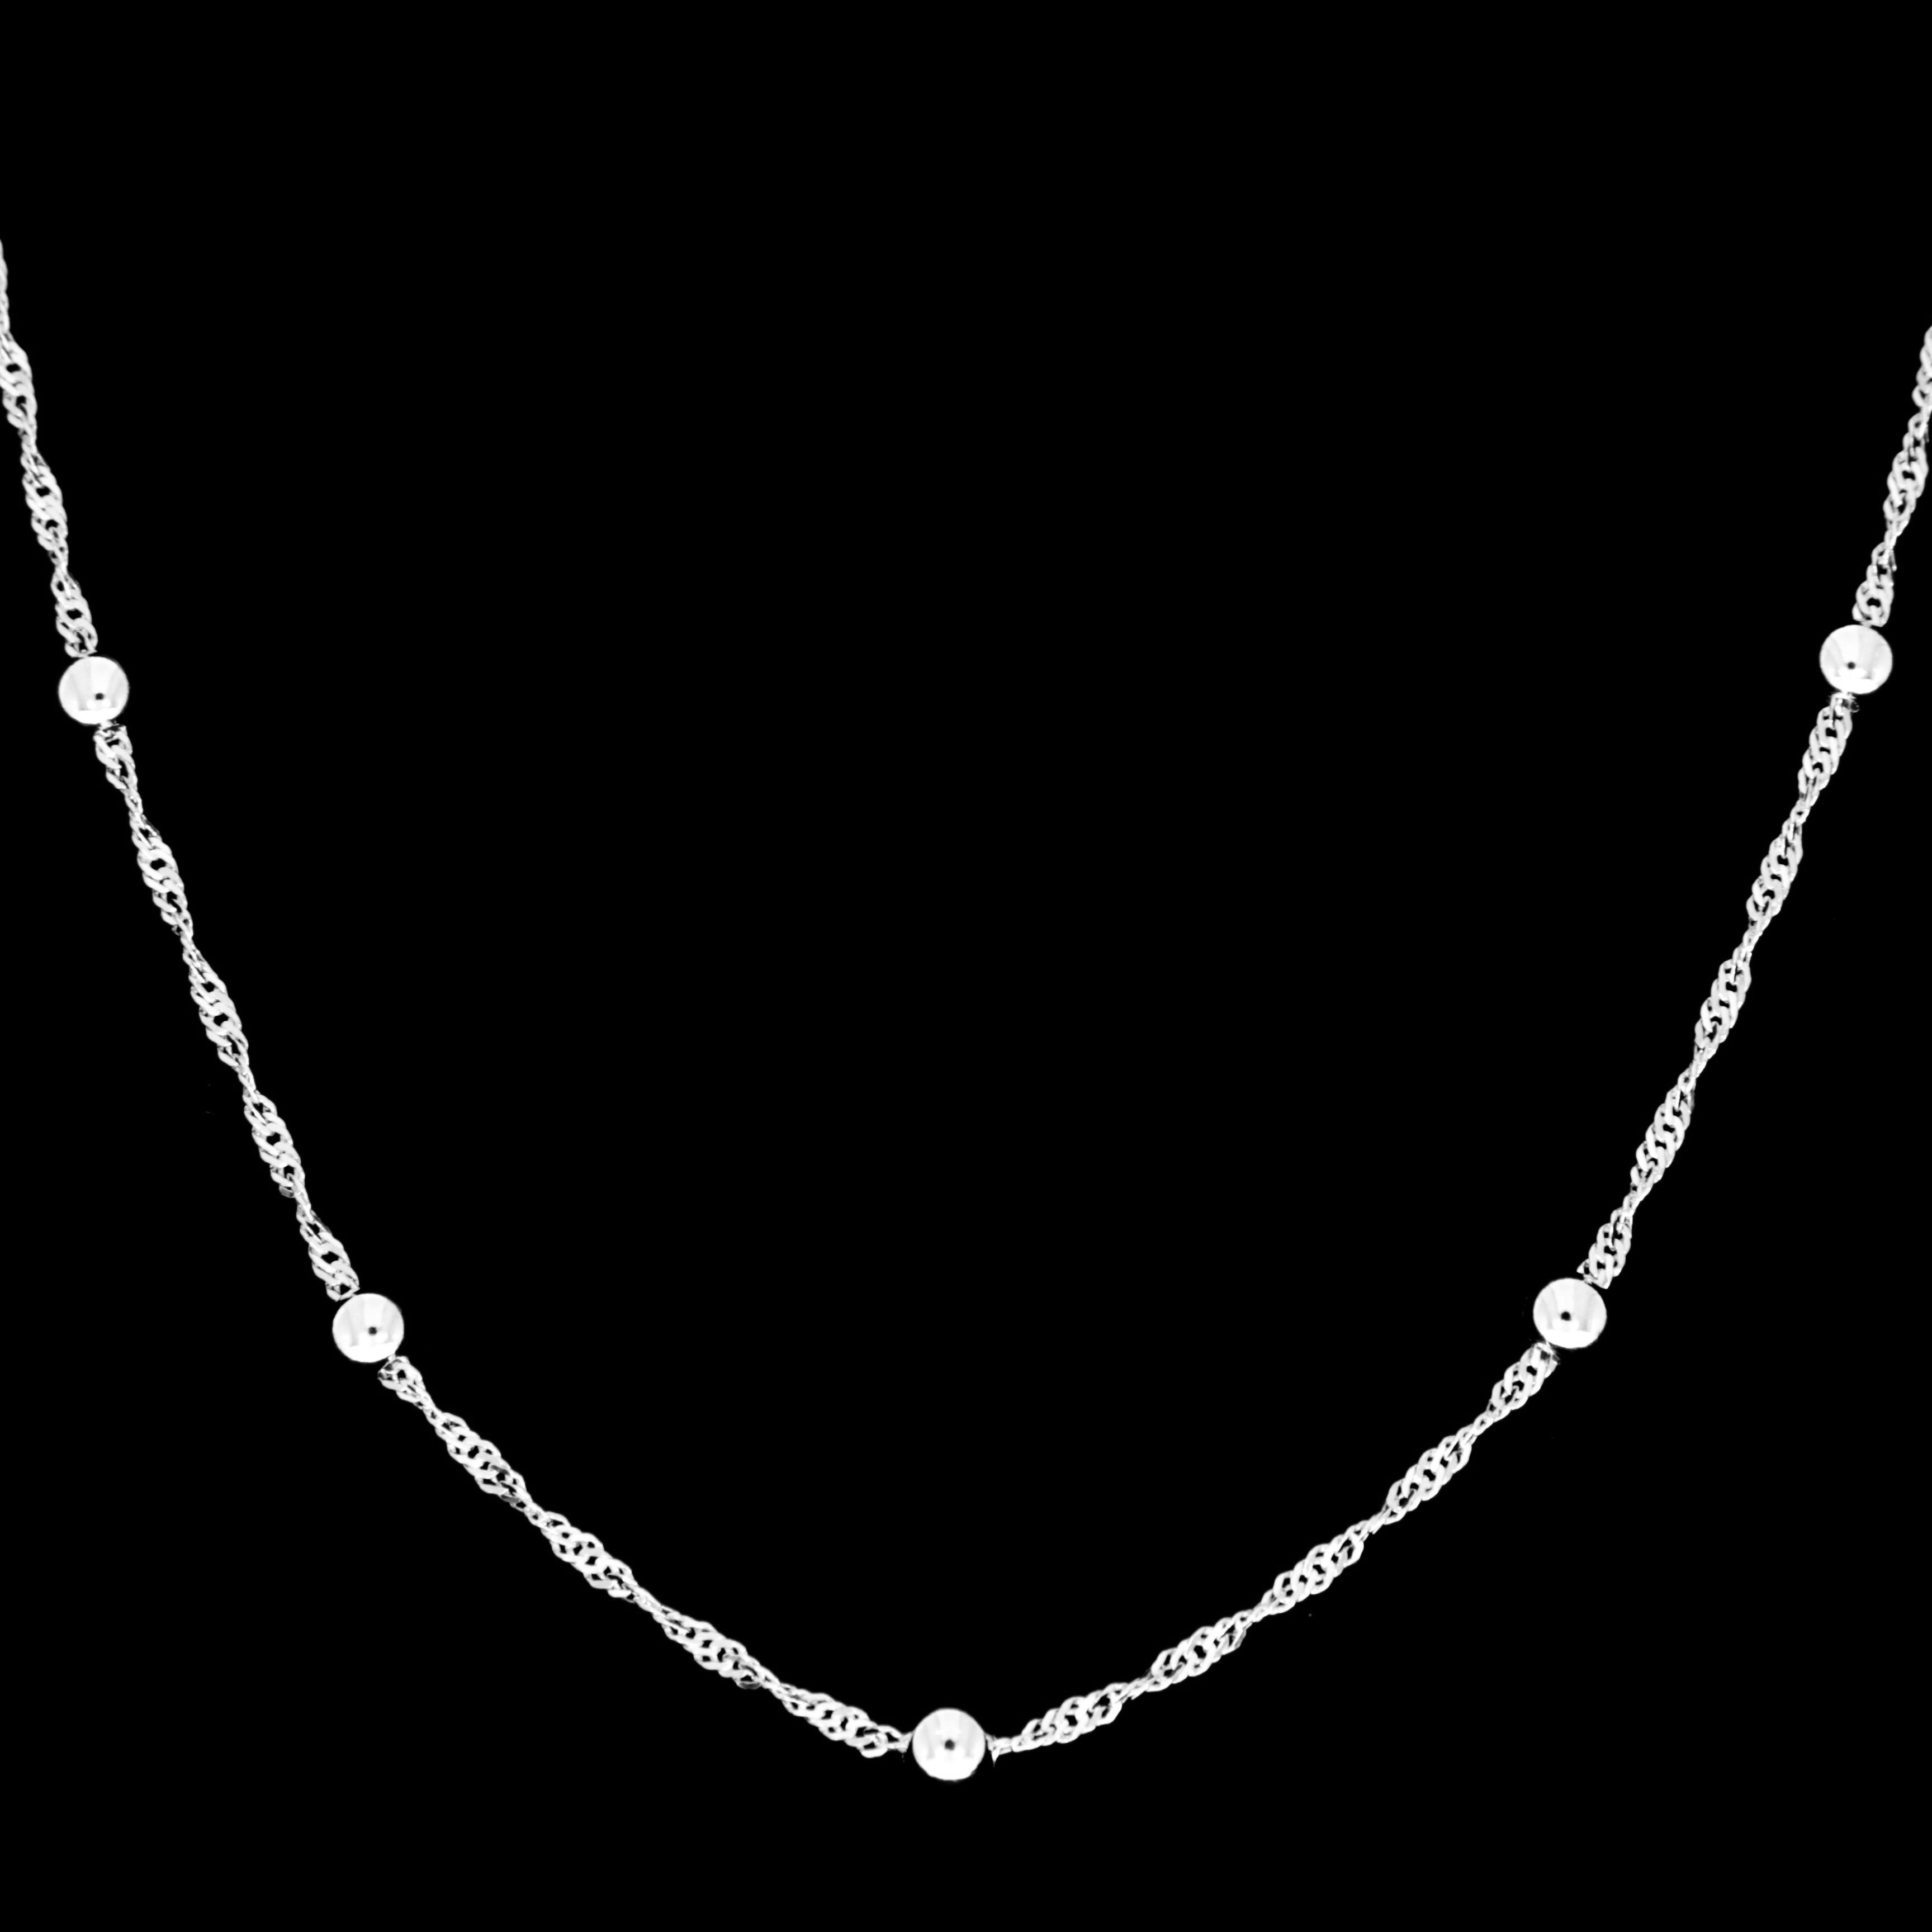 Made in Italy - 925 Sterling Silver Rhodium Ball Beads Singapore Chain Necklace - SING01